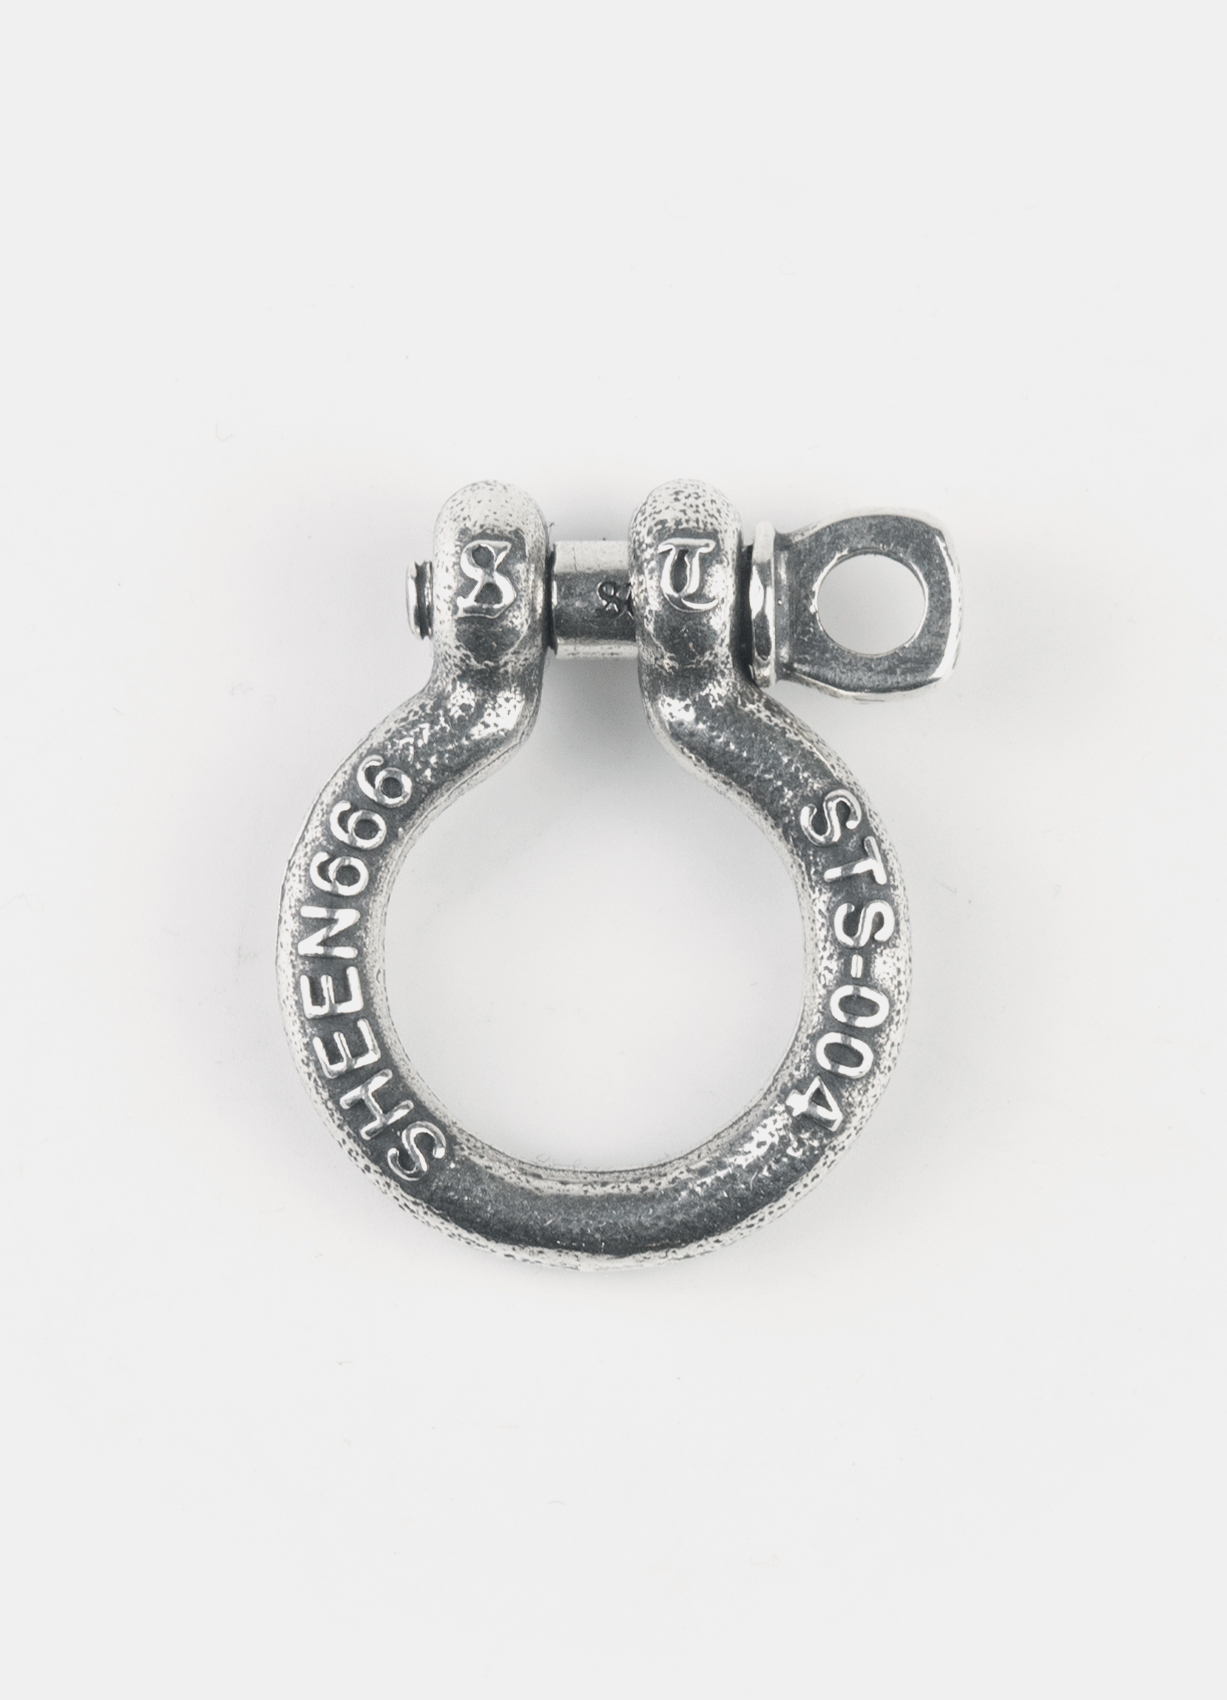 Industrial Series STS004 Shackle Ring